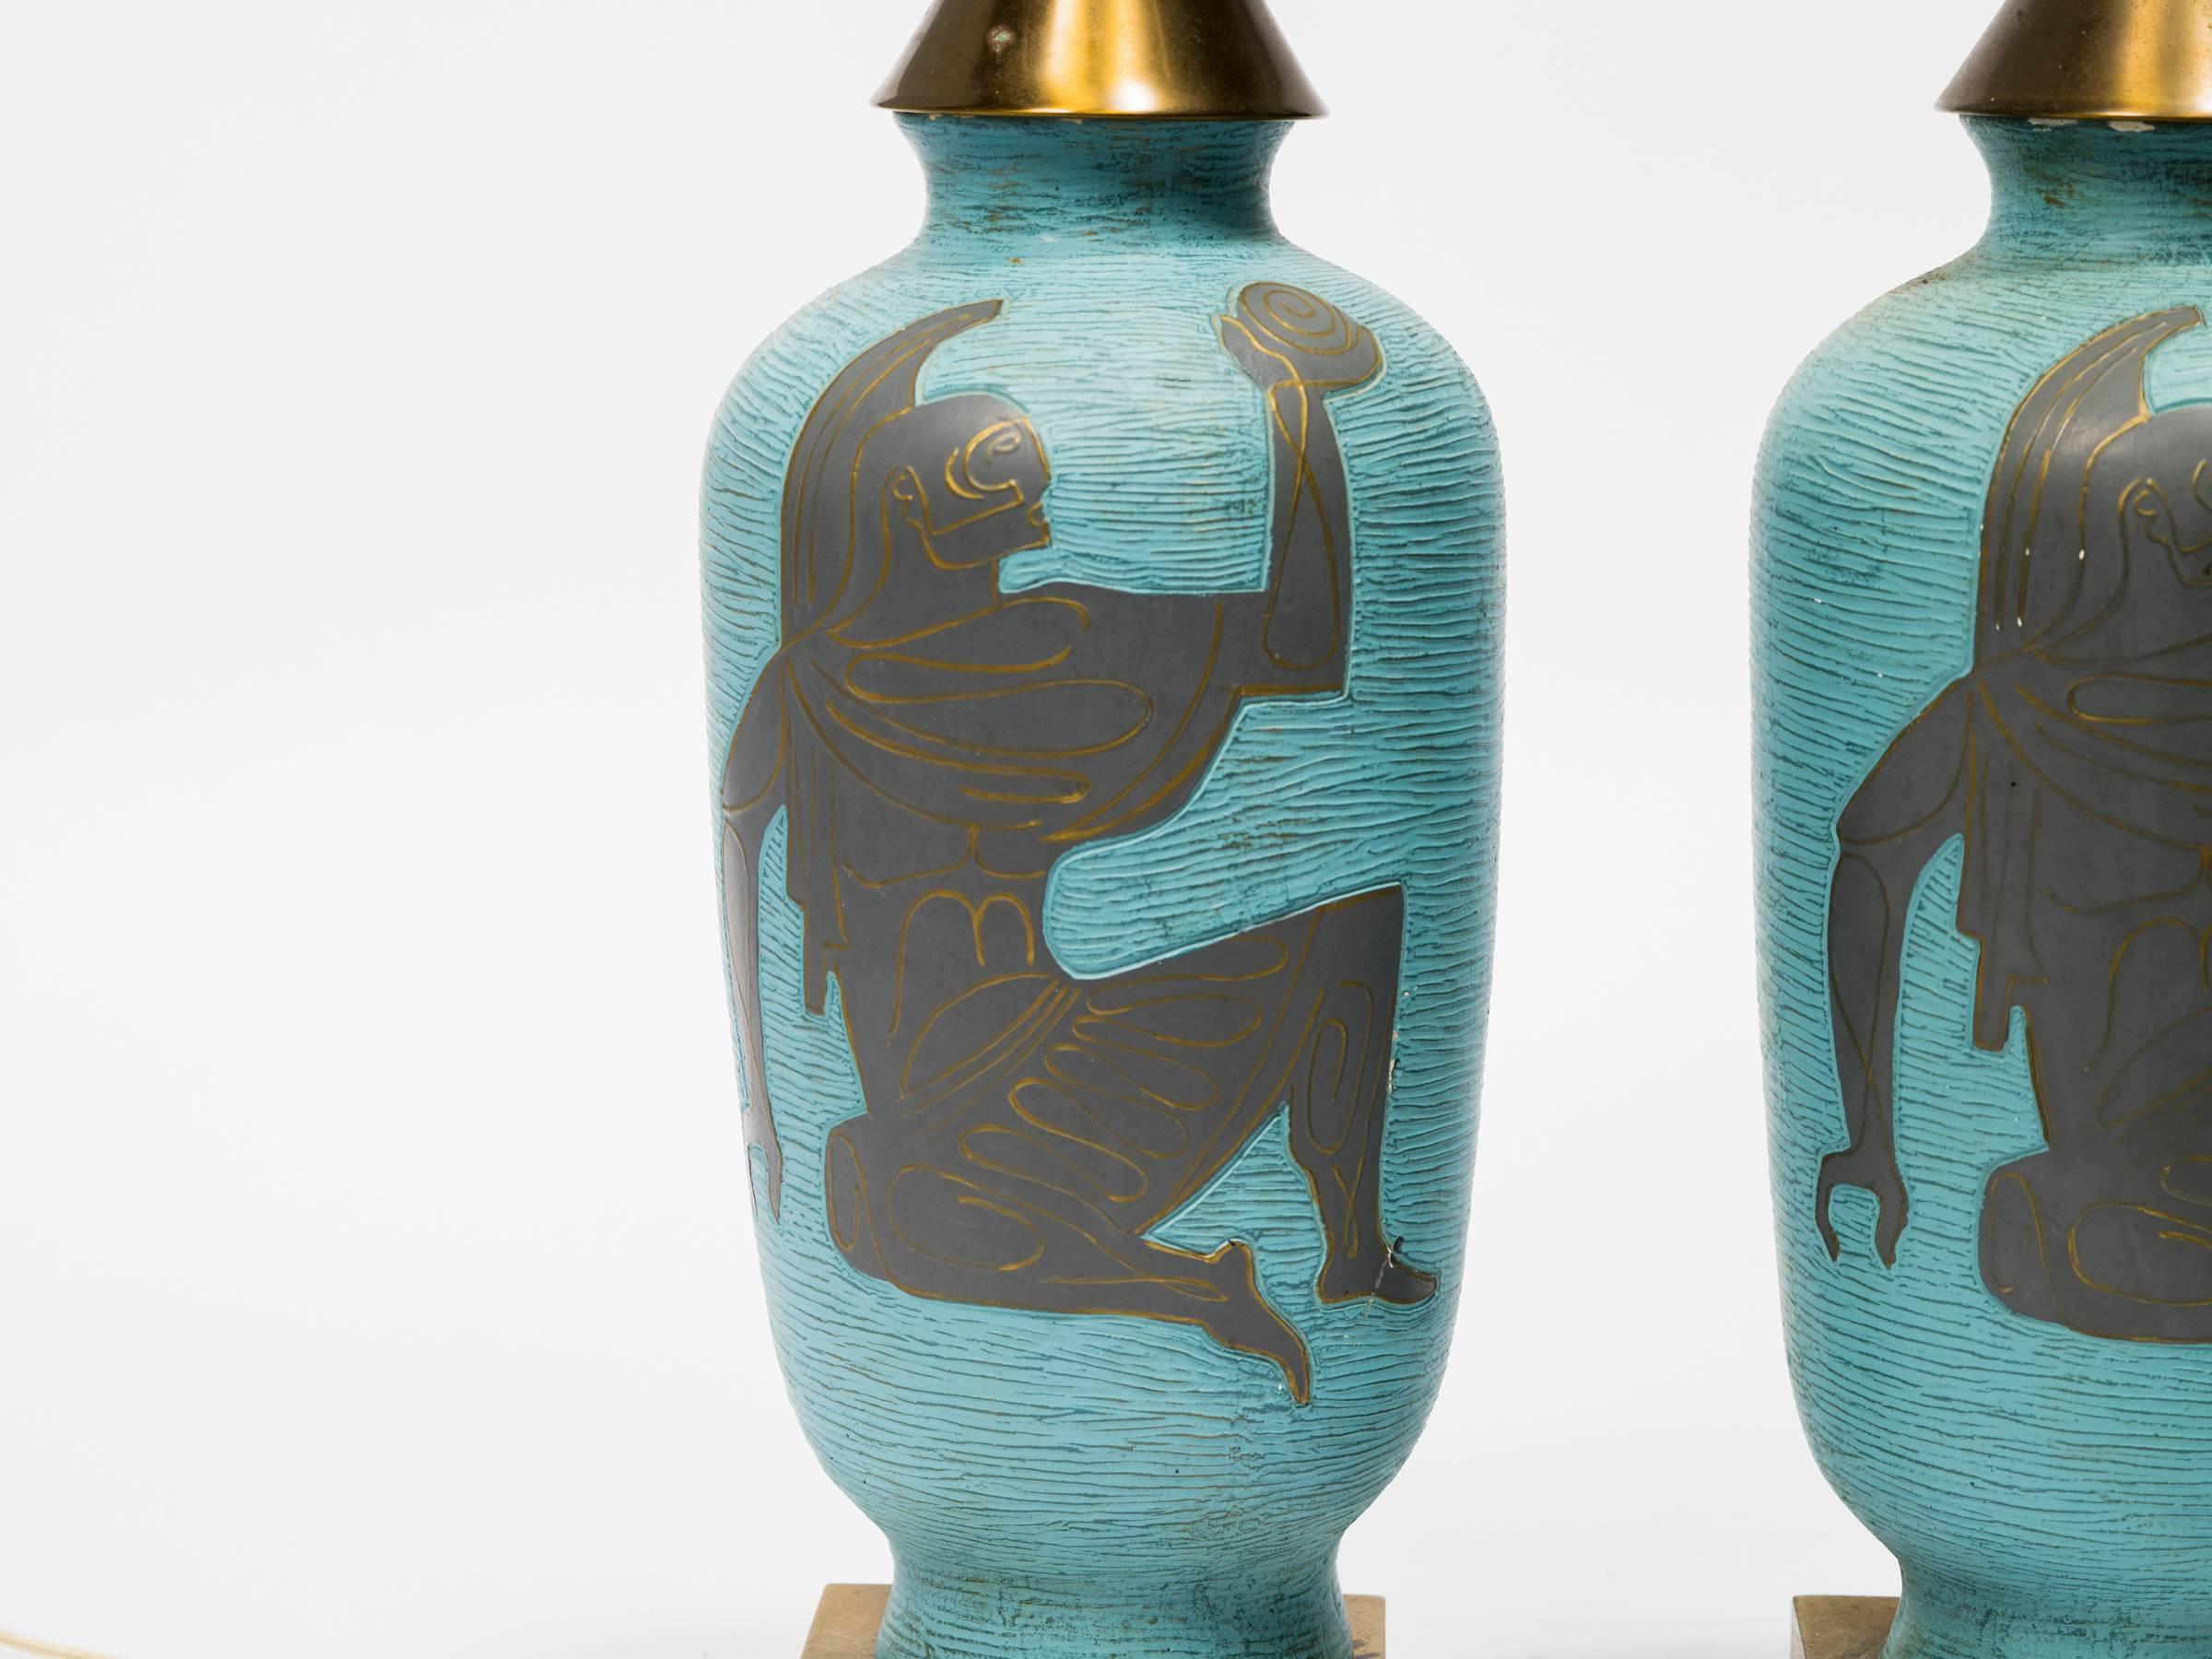 Pair of Gustavsberg style Greek figural lamps

Dimensions are to the top of the socket.